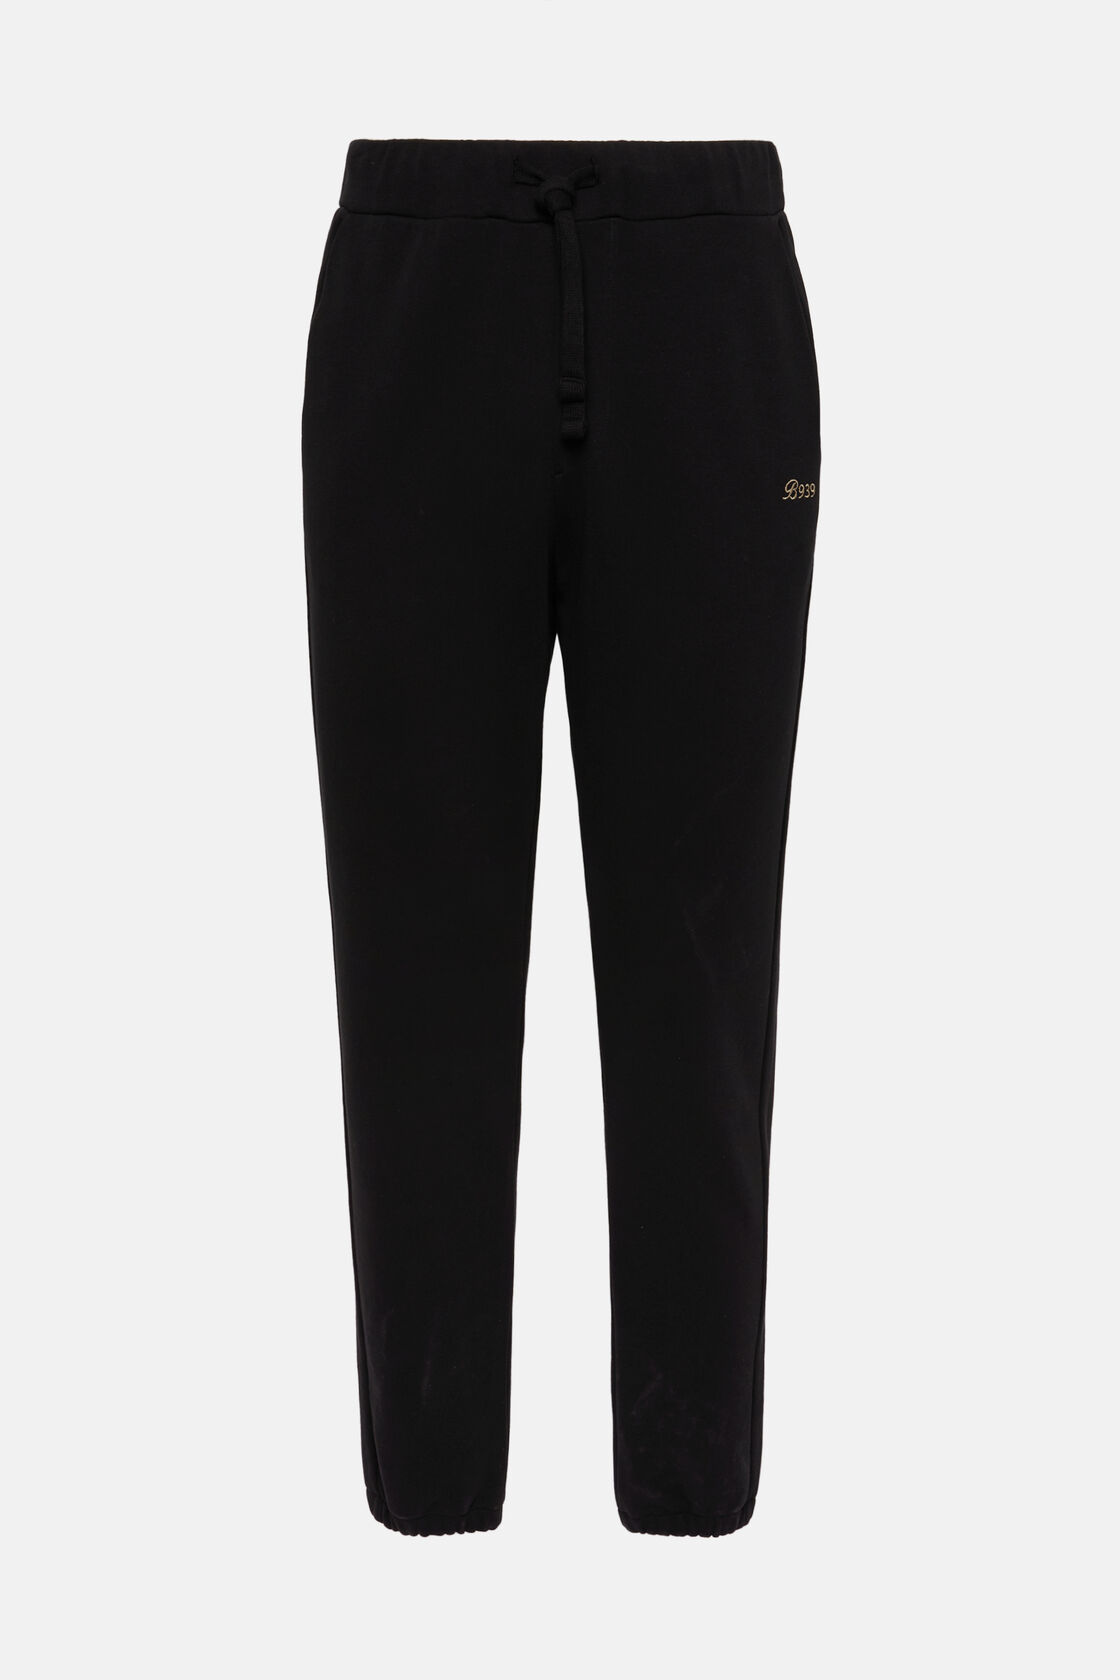 Trousers in Organic Cotton Blend, Black, hi-res